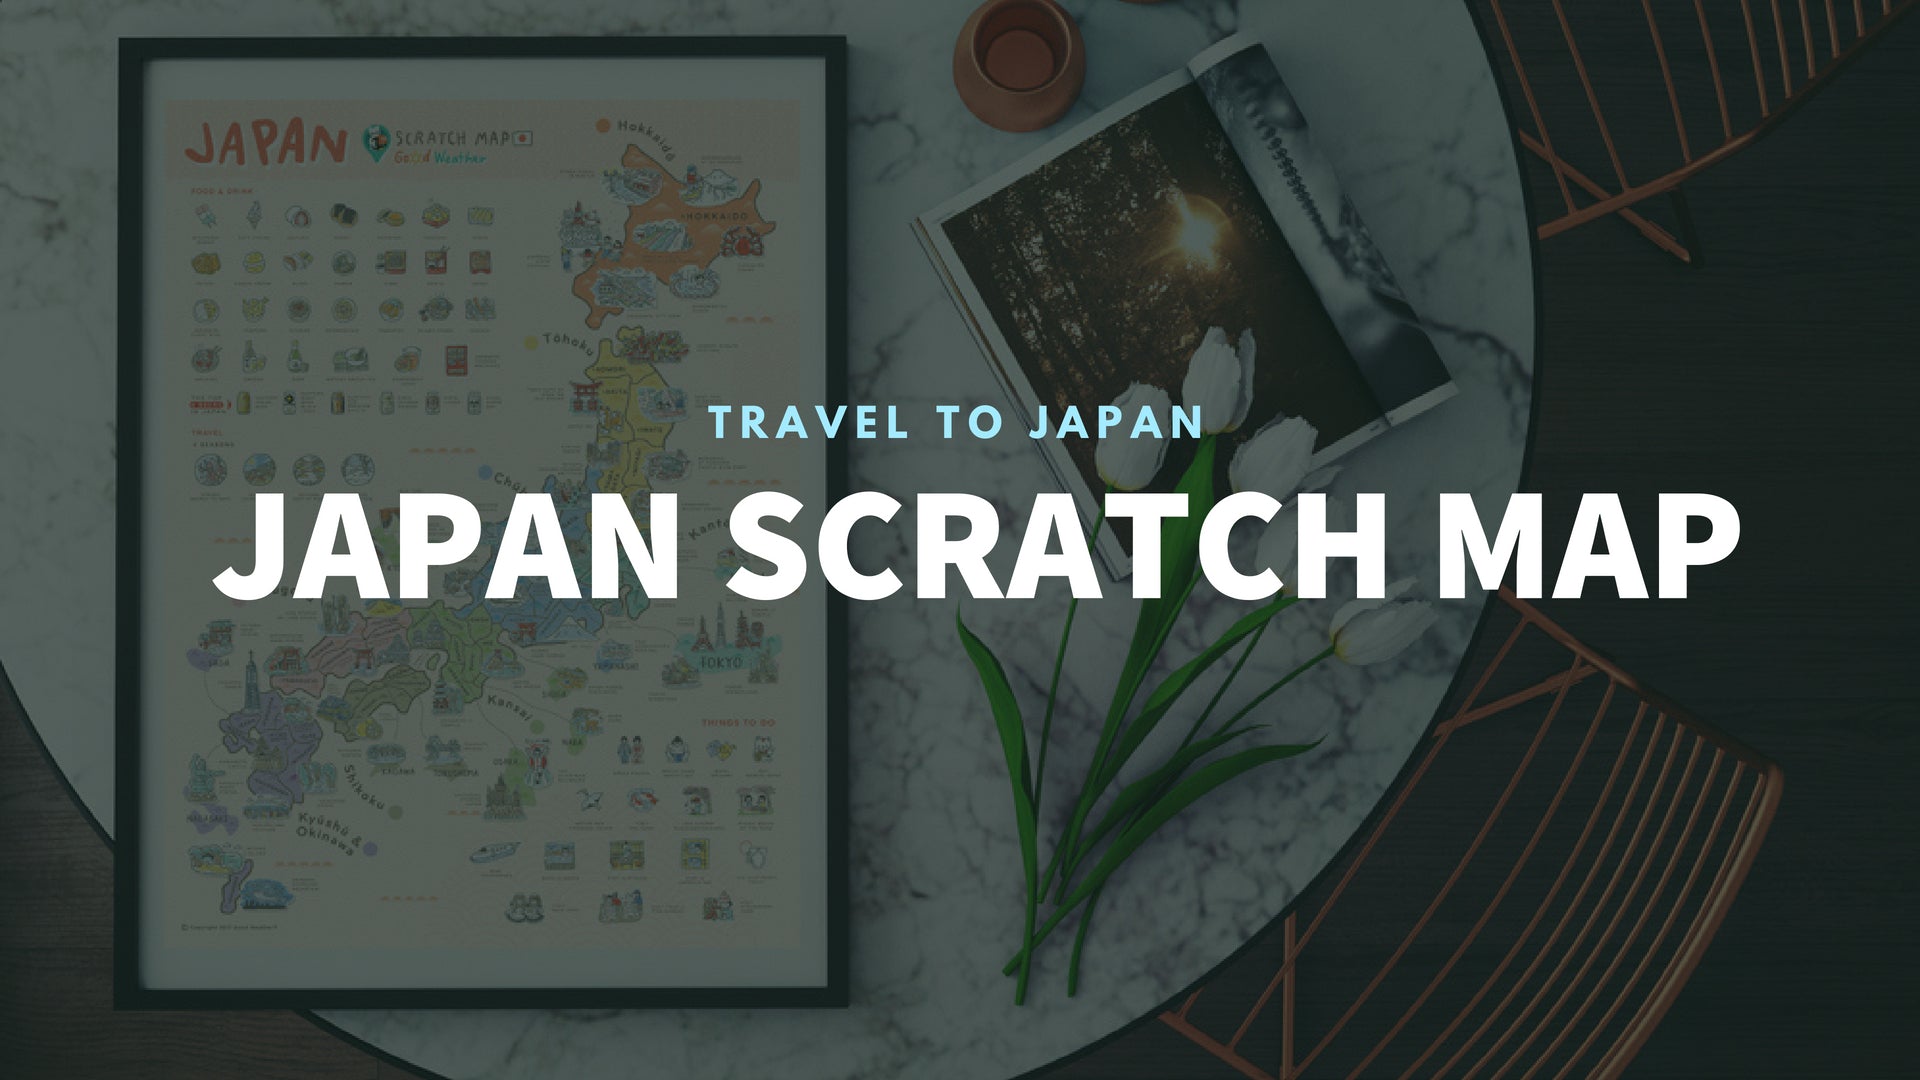 Good Weather Japan Scratch Travel Map with Frame Travel to Japan deluxe luckies world travel map with pins europe uk rosegold small personalised Scratch Off Traveling Japan travelization 日本 刮刮地圖 刮刮樂 世界地圖 banner - GadgetiCloud